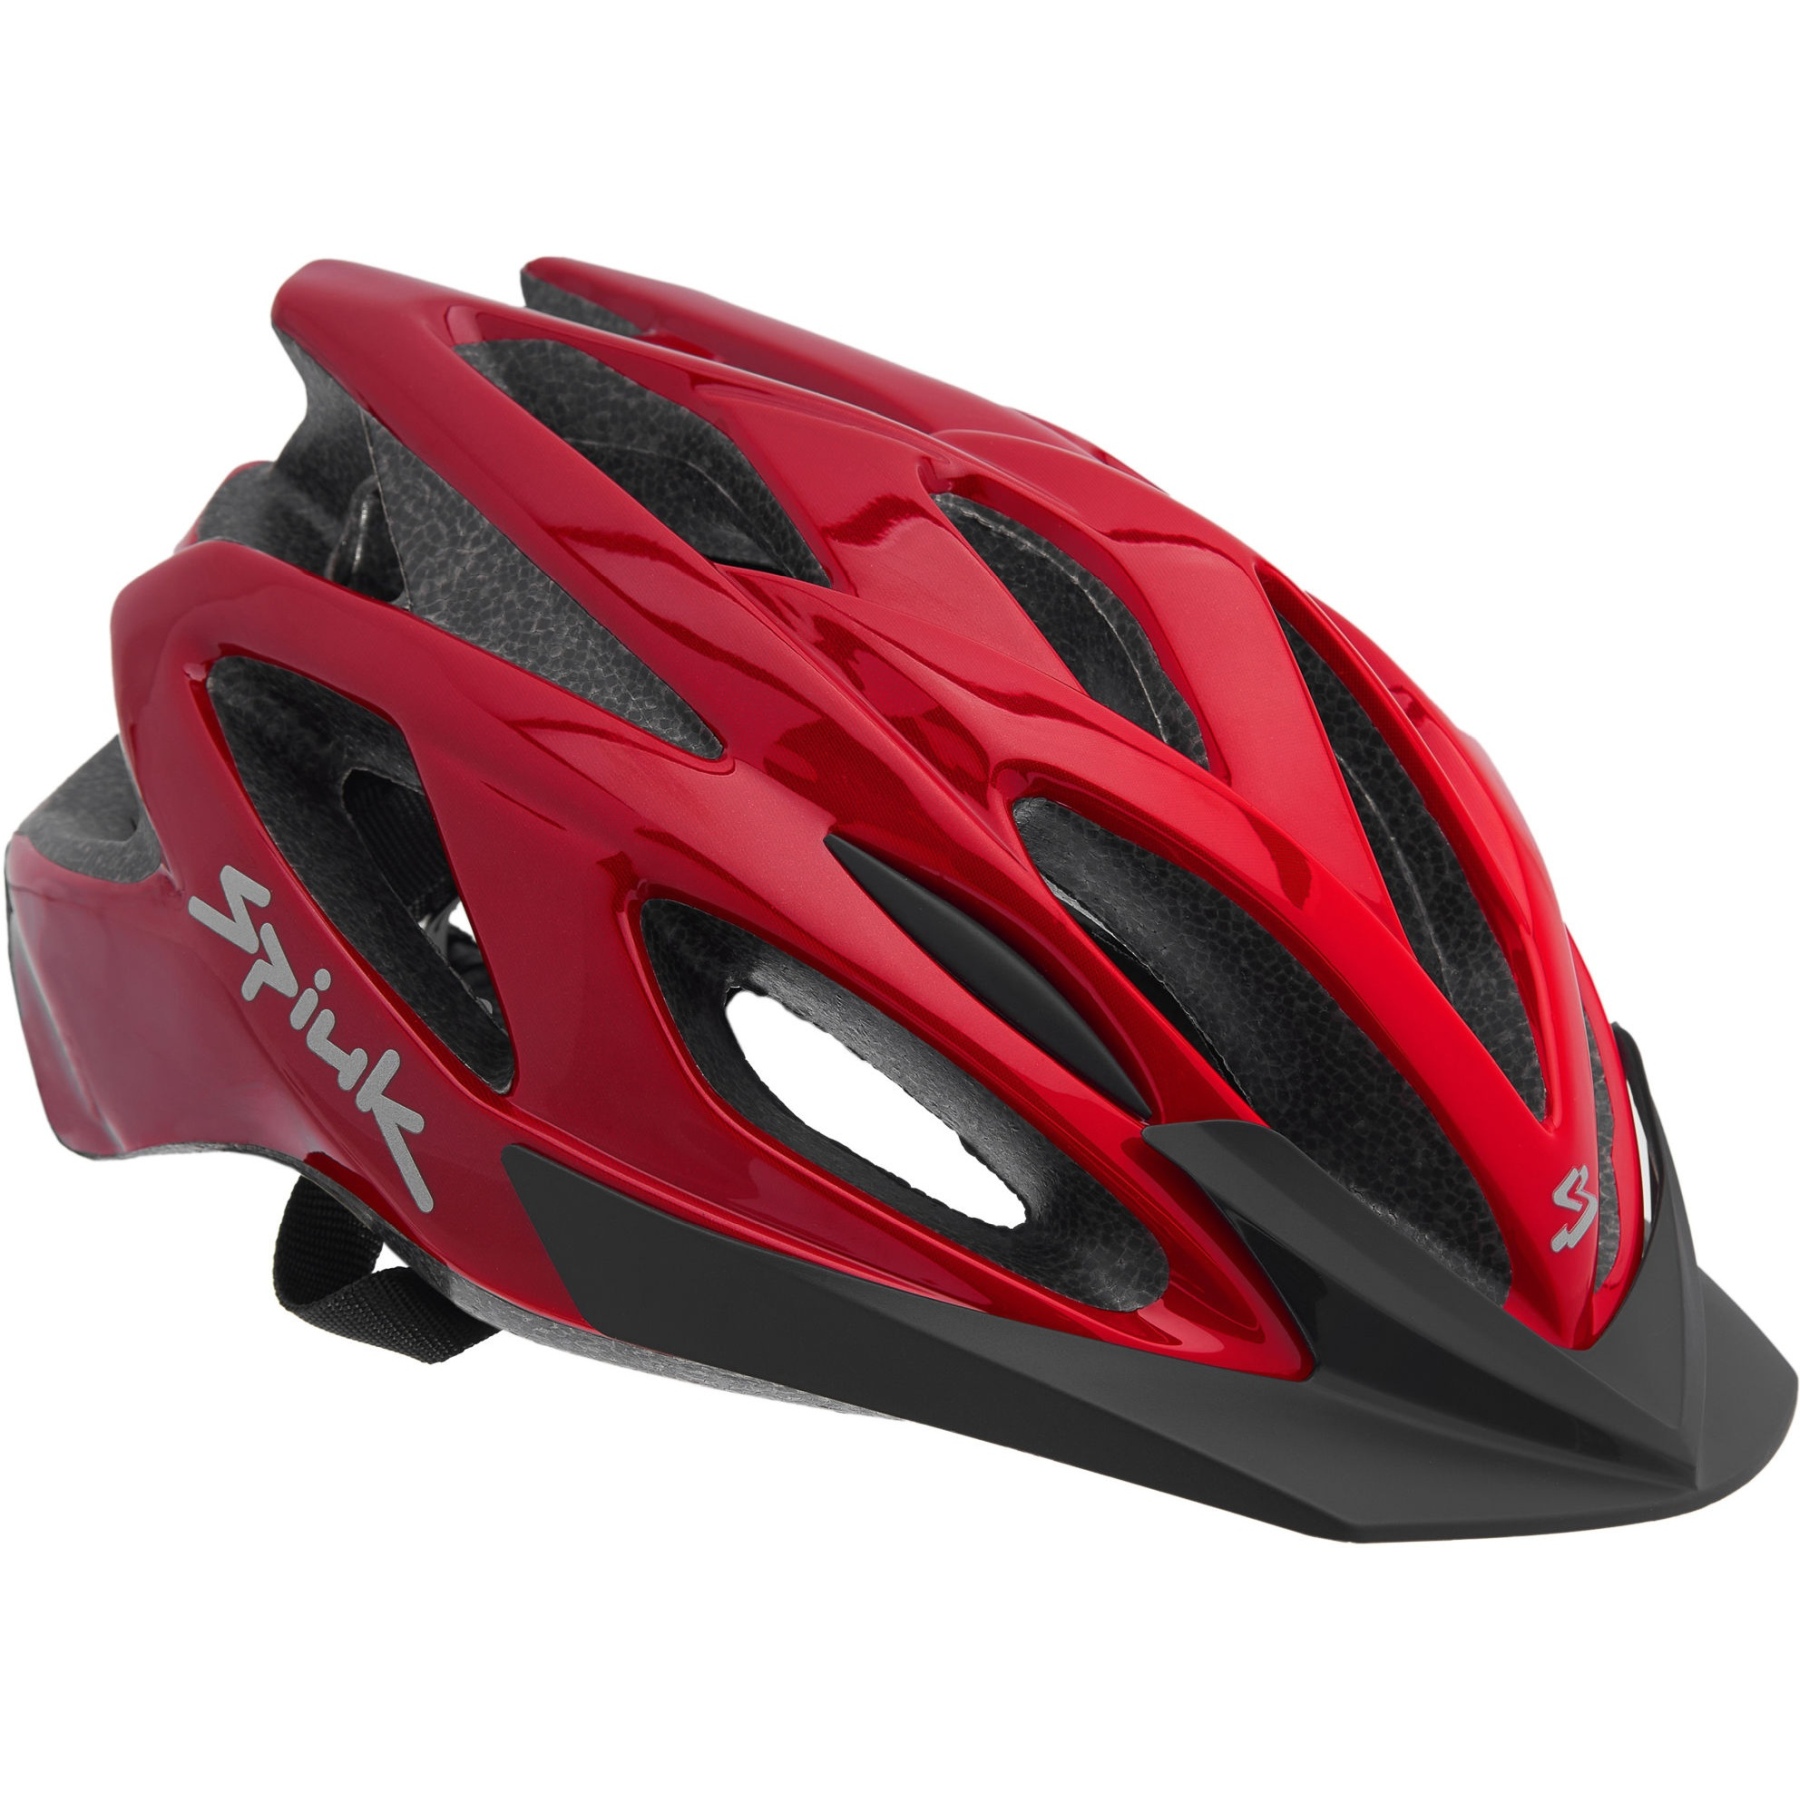 Picture of Spiuk Tamera Evo Helmet - red